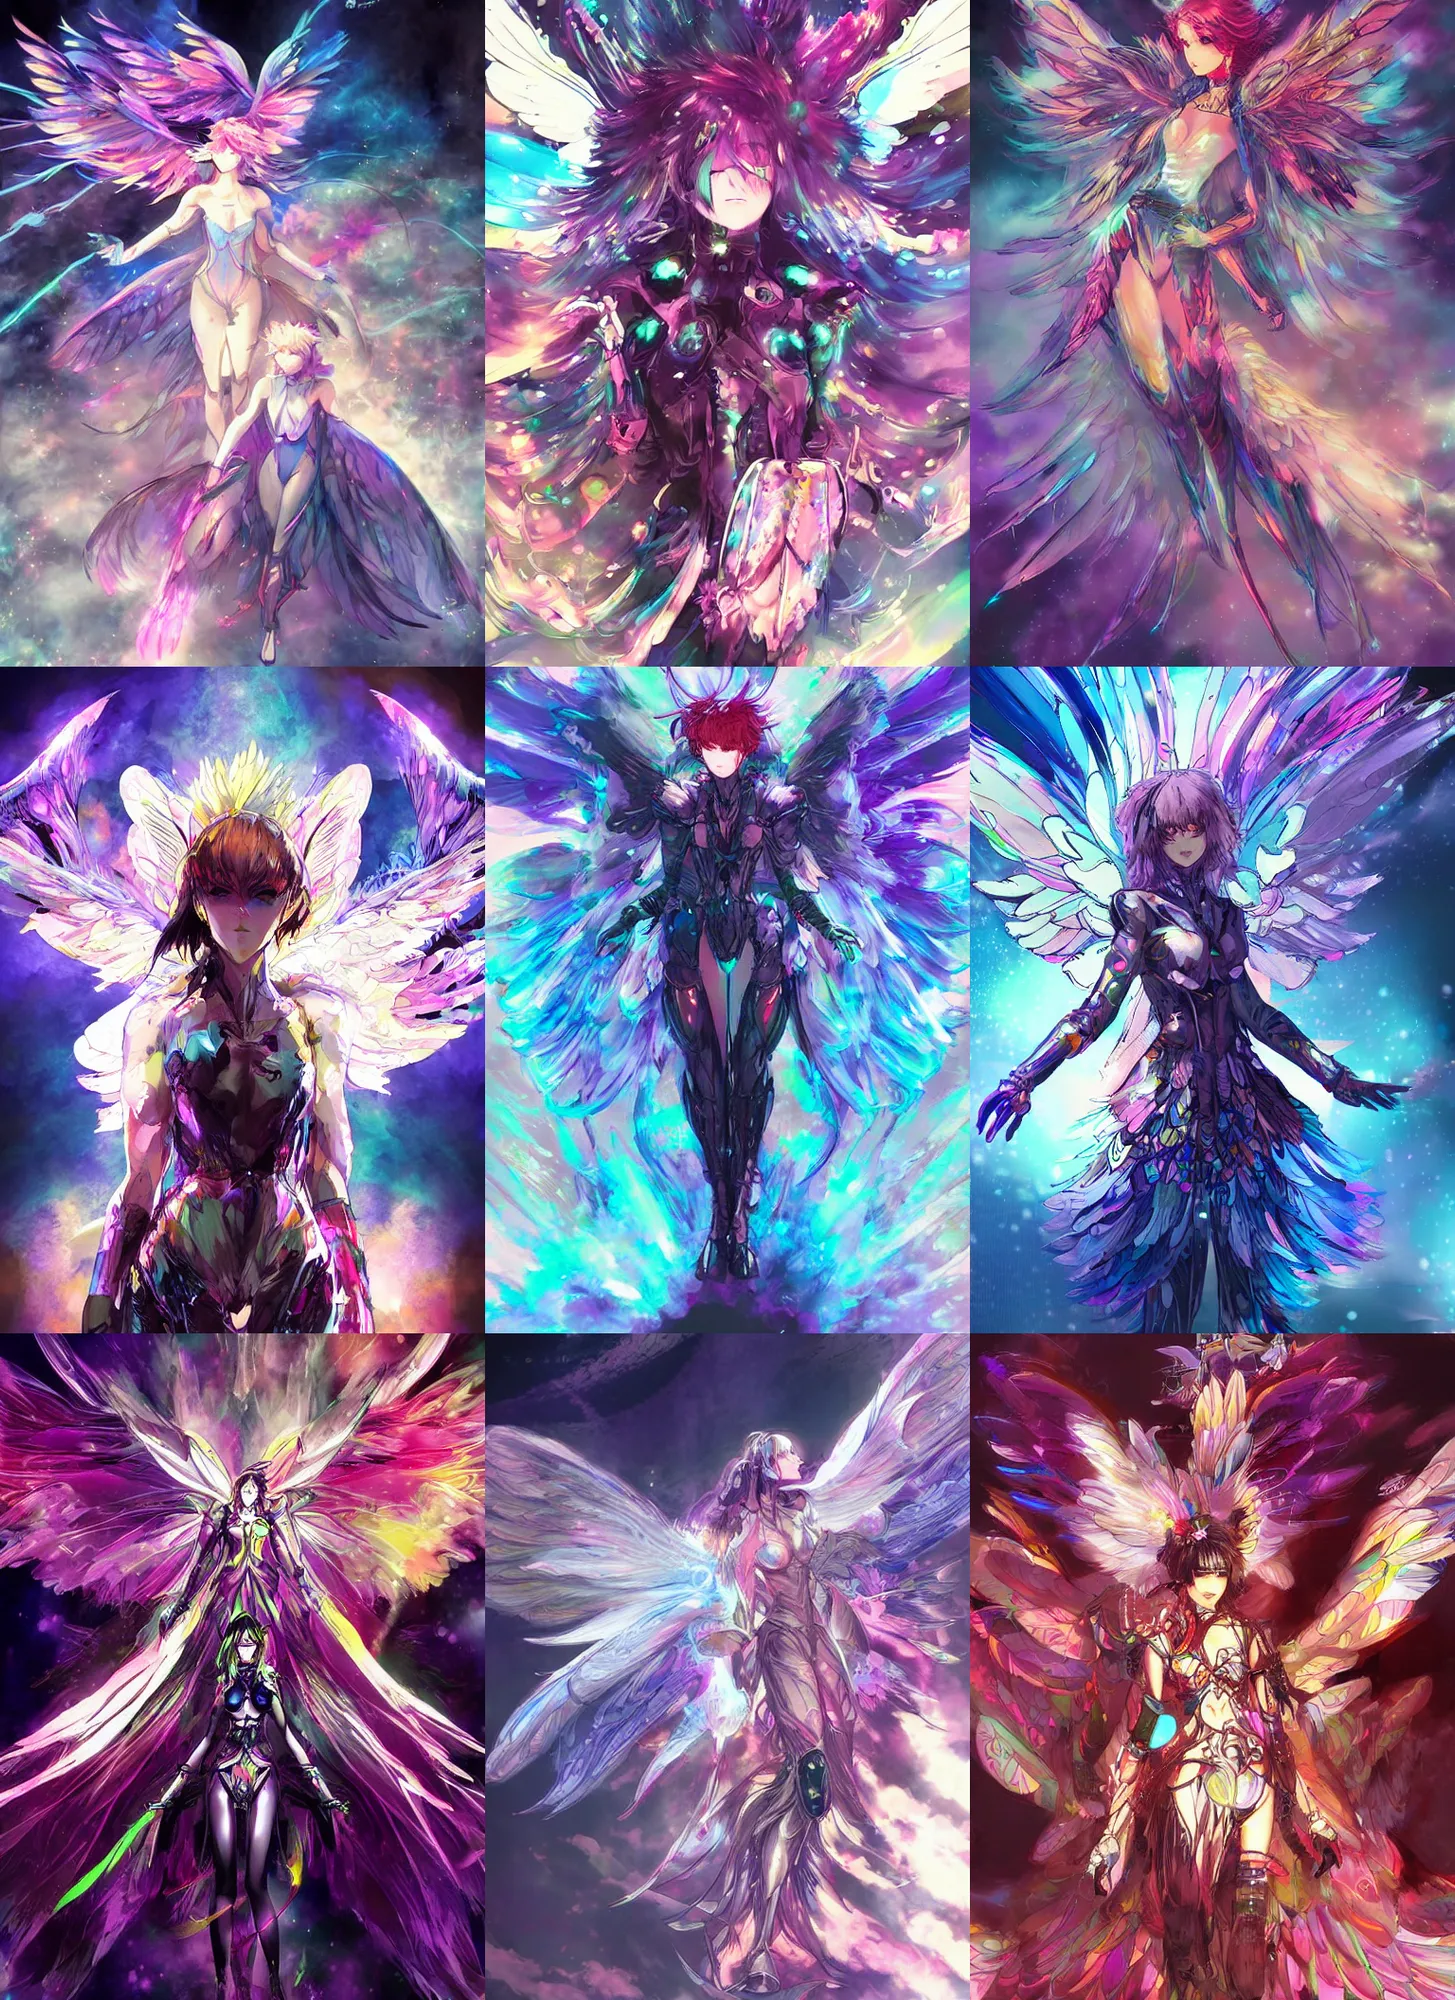 Prompt: wonder dream seraphim and cherubim dark futuristic technologically advanced faeries lady feather wing digital art painting fantasy bloom vibrant in style of yoji shinkawa and hyung - tae kim illustration character design concept colorful joy atmospheric lighting butterfly